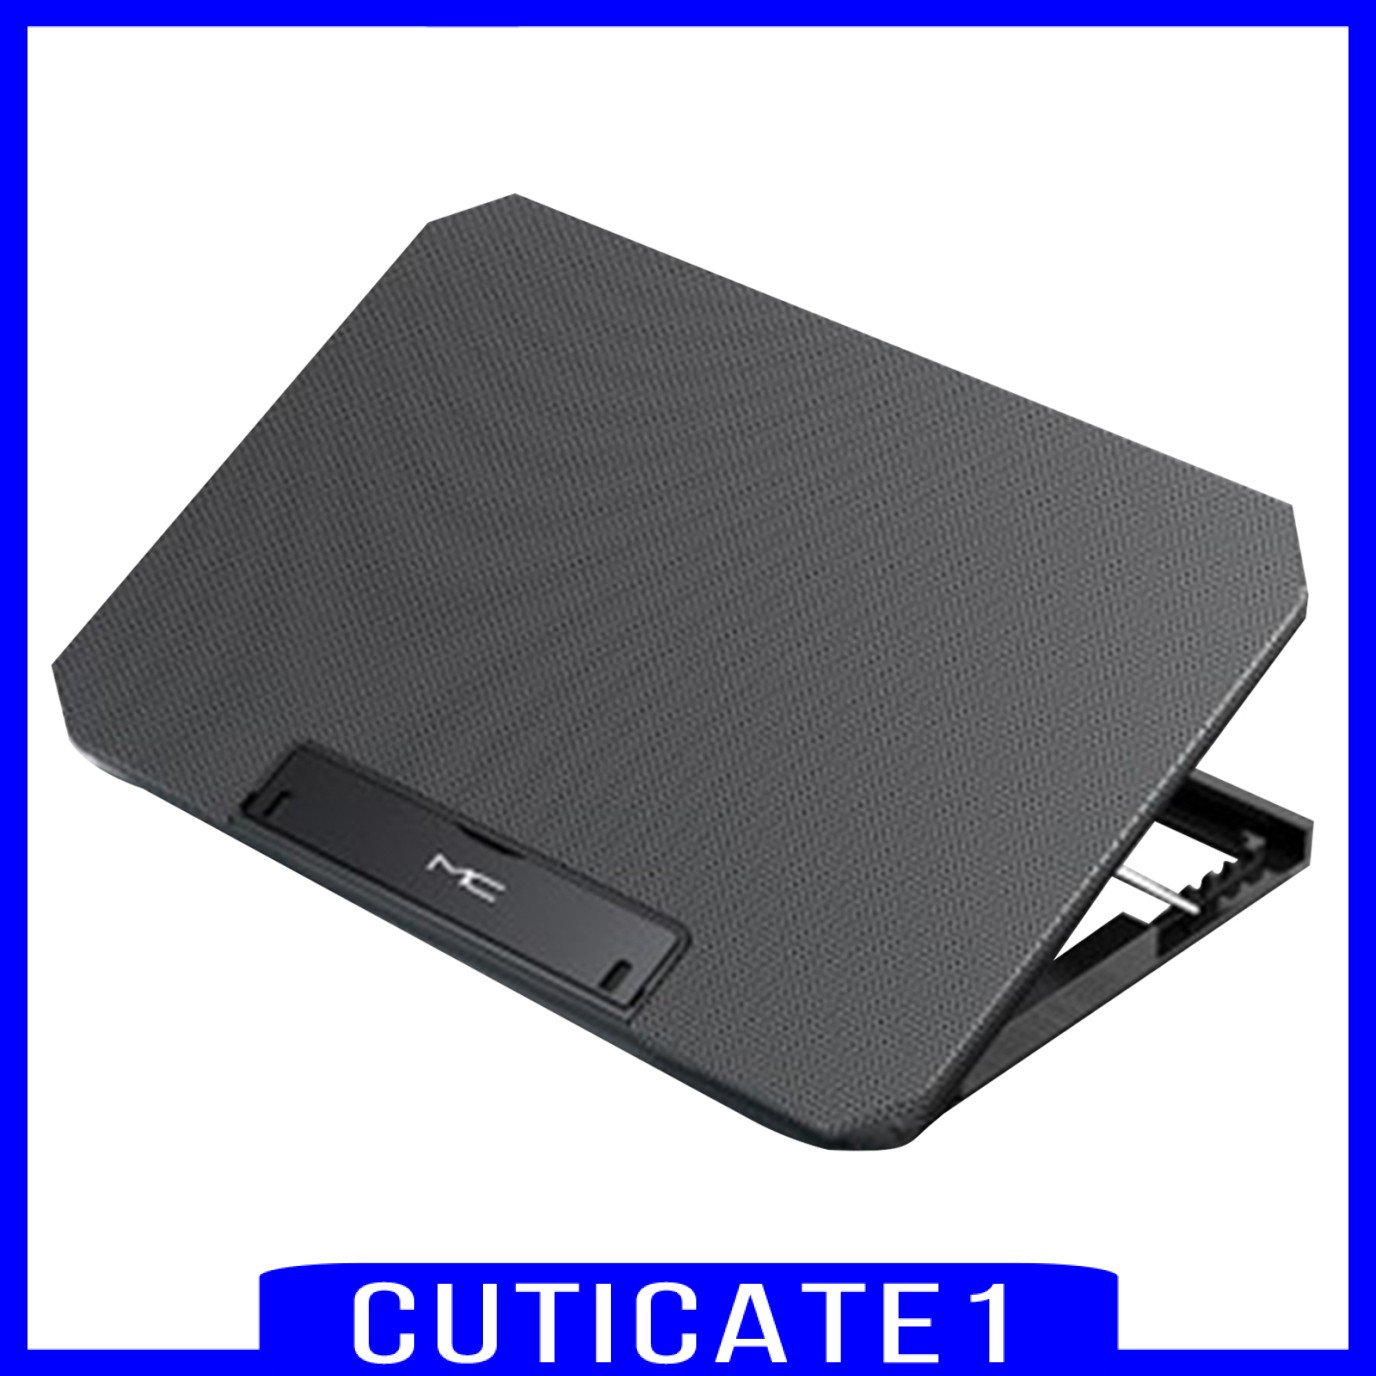 Slim Portable 15.6 "- 17" Notebook Laptop Cooler Pad Stand 2 Fan 2 Usb Ports